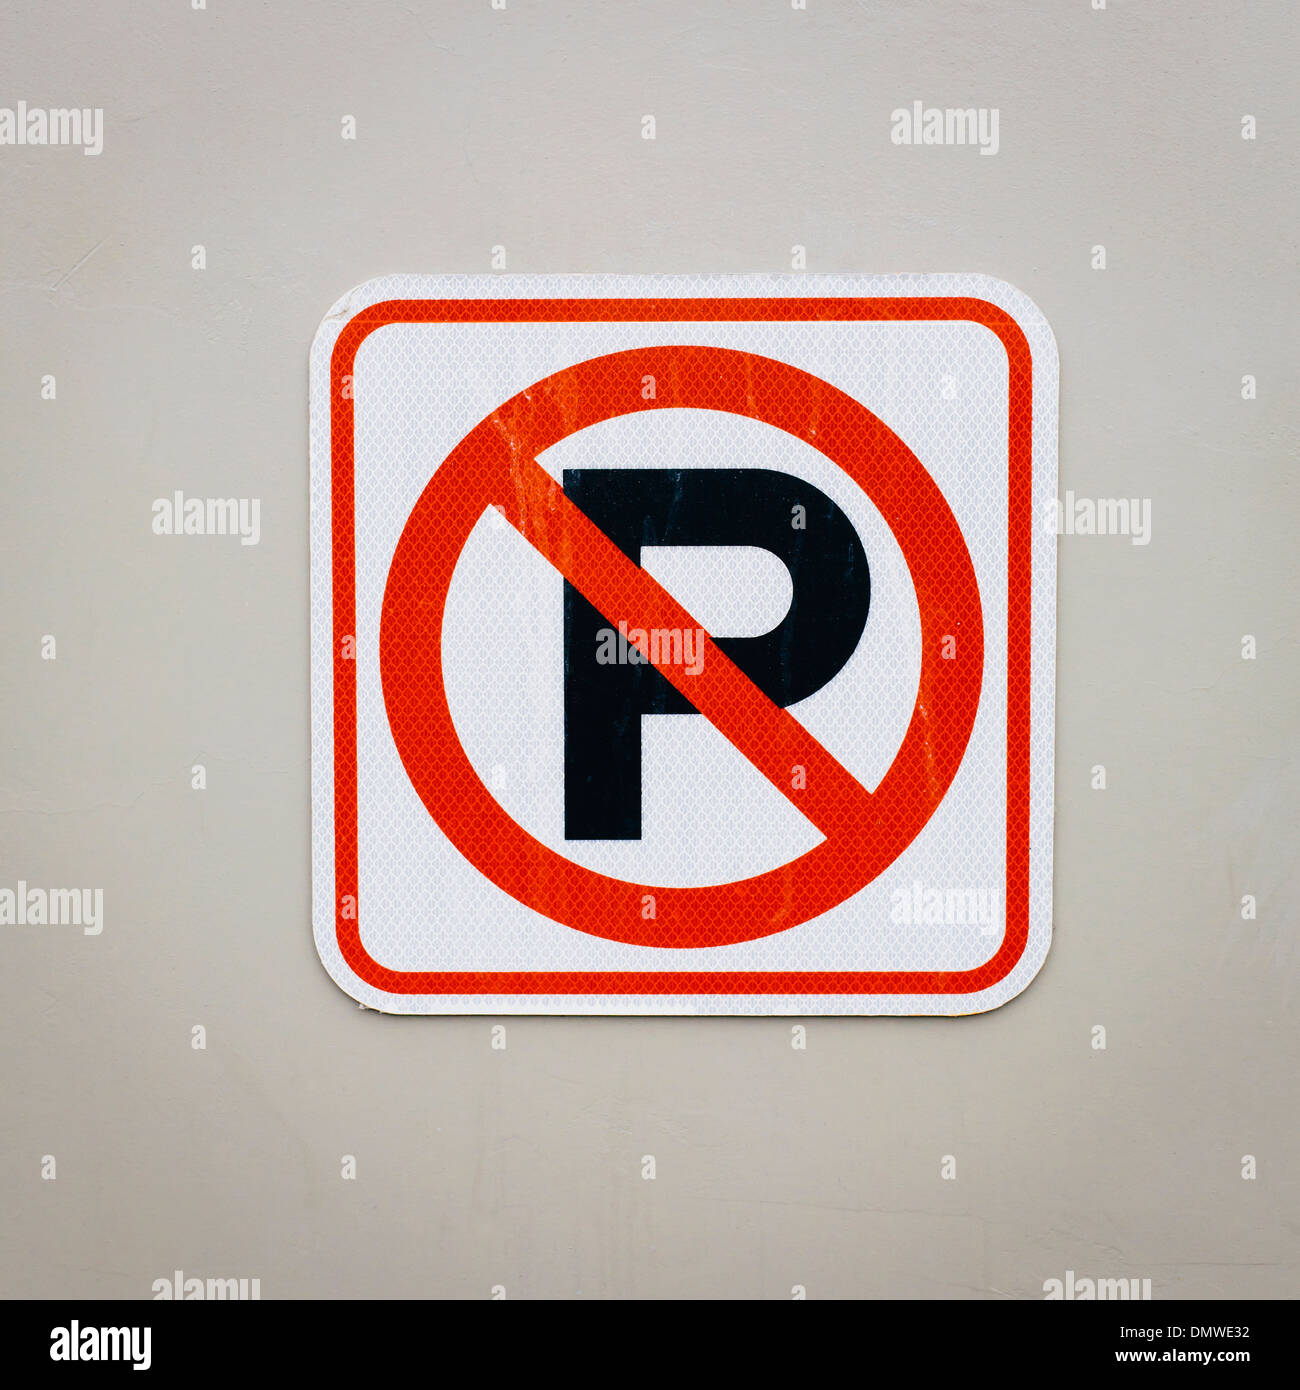 A traffic sign No Parking sign. Stock Photo